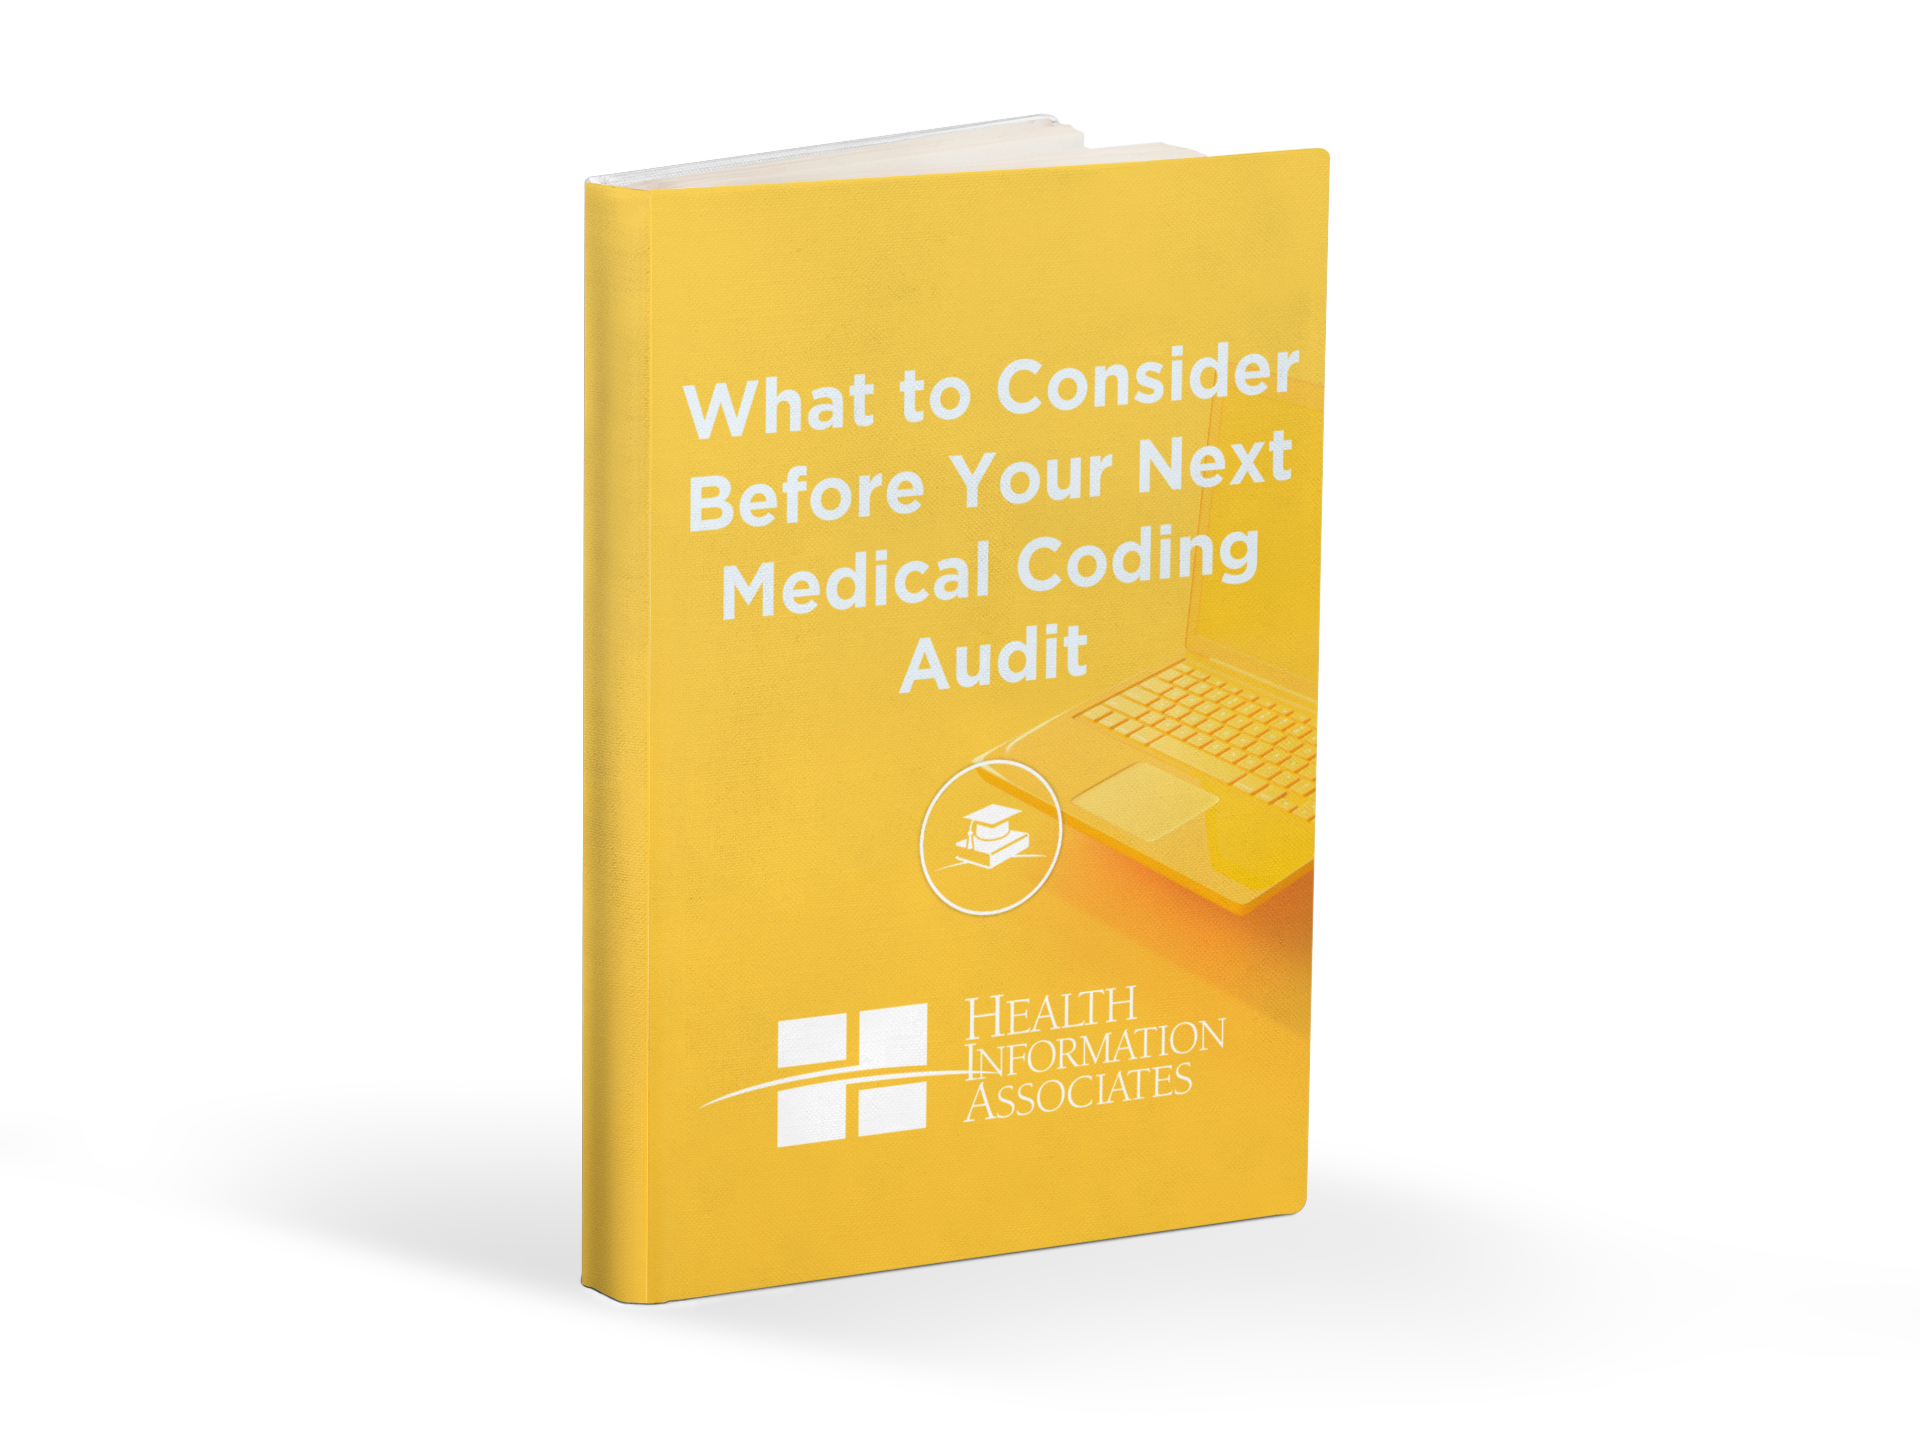 What to Consider Before an Audit